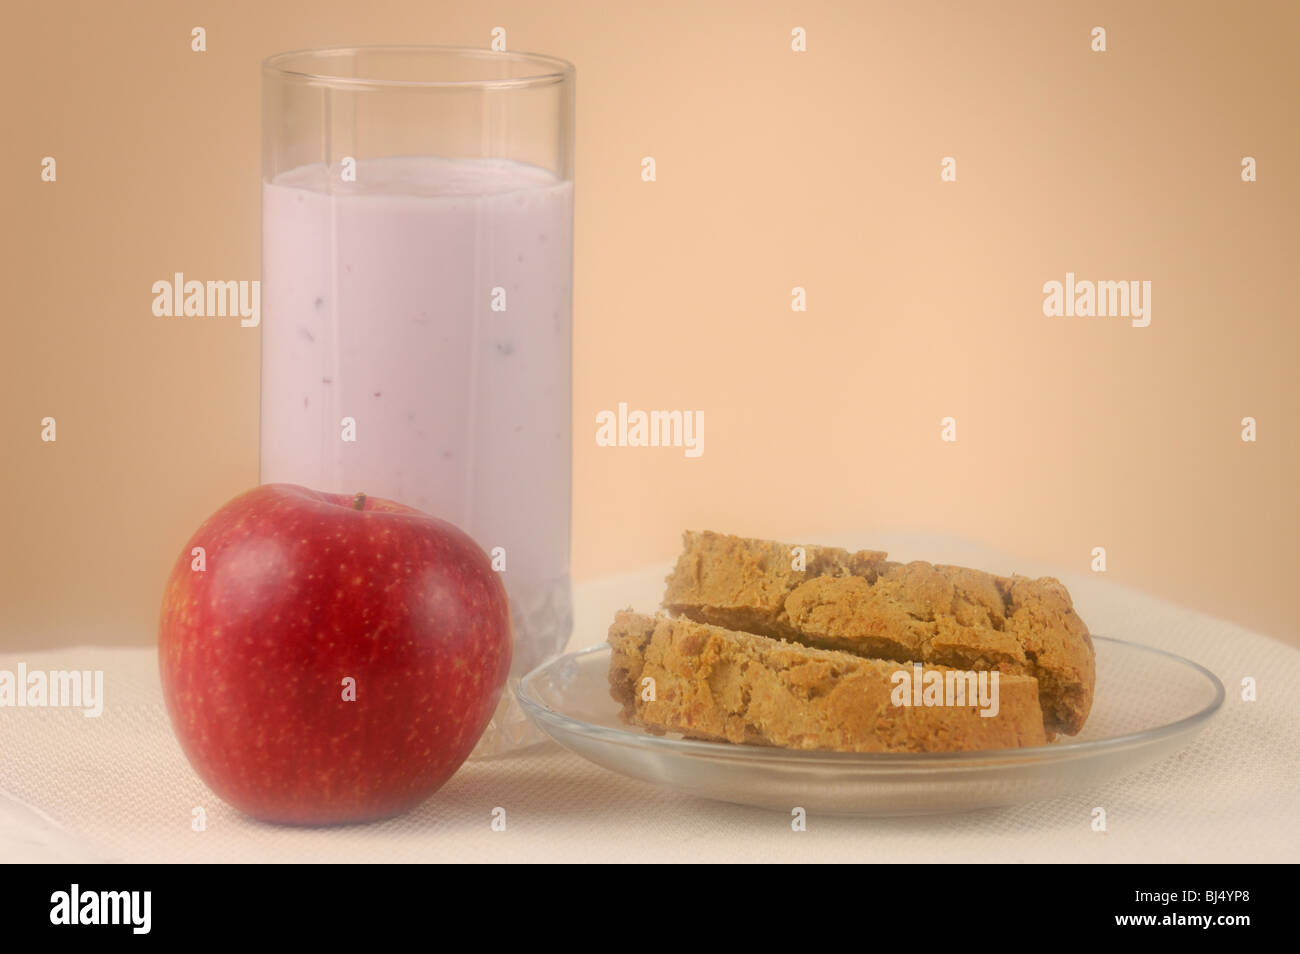 Home made bread, glass of yogurt and an apple Stock Photo